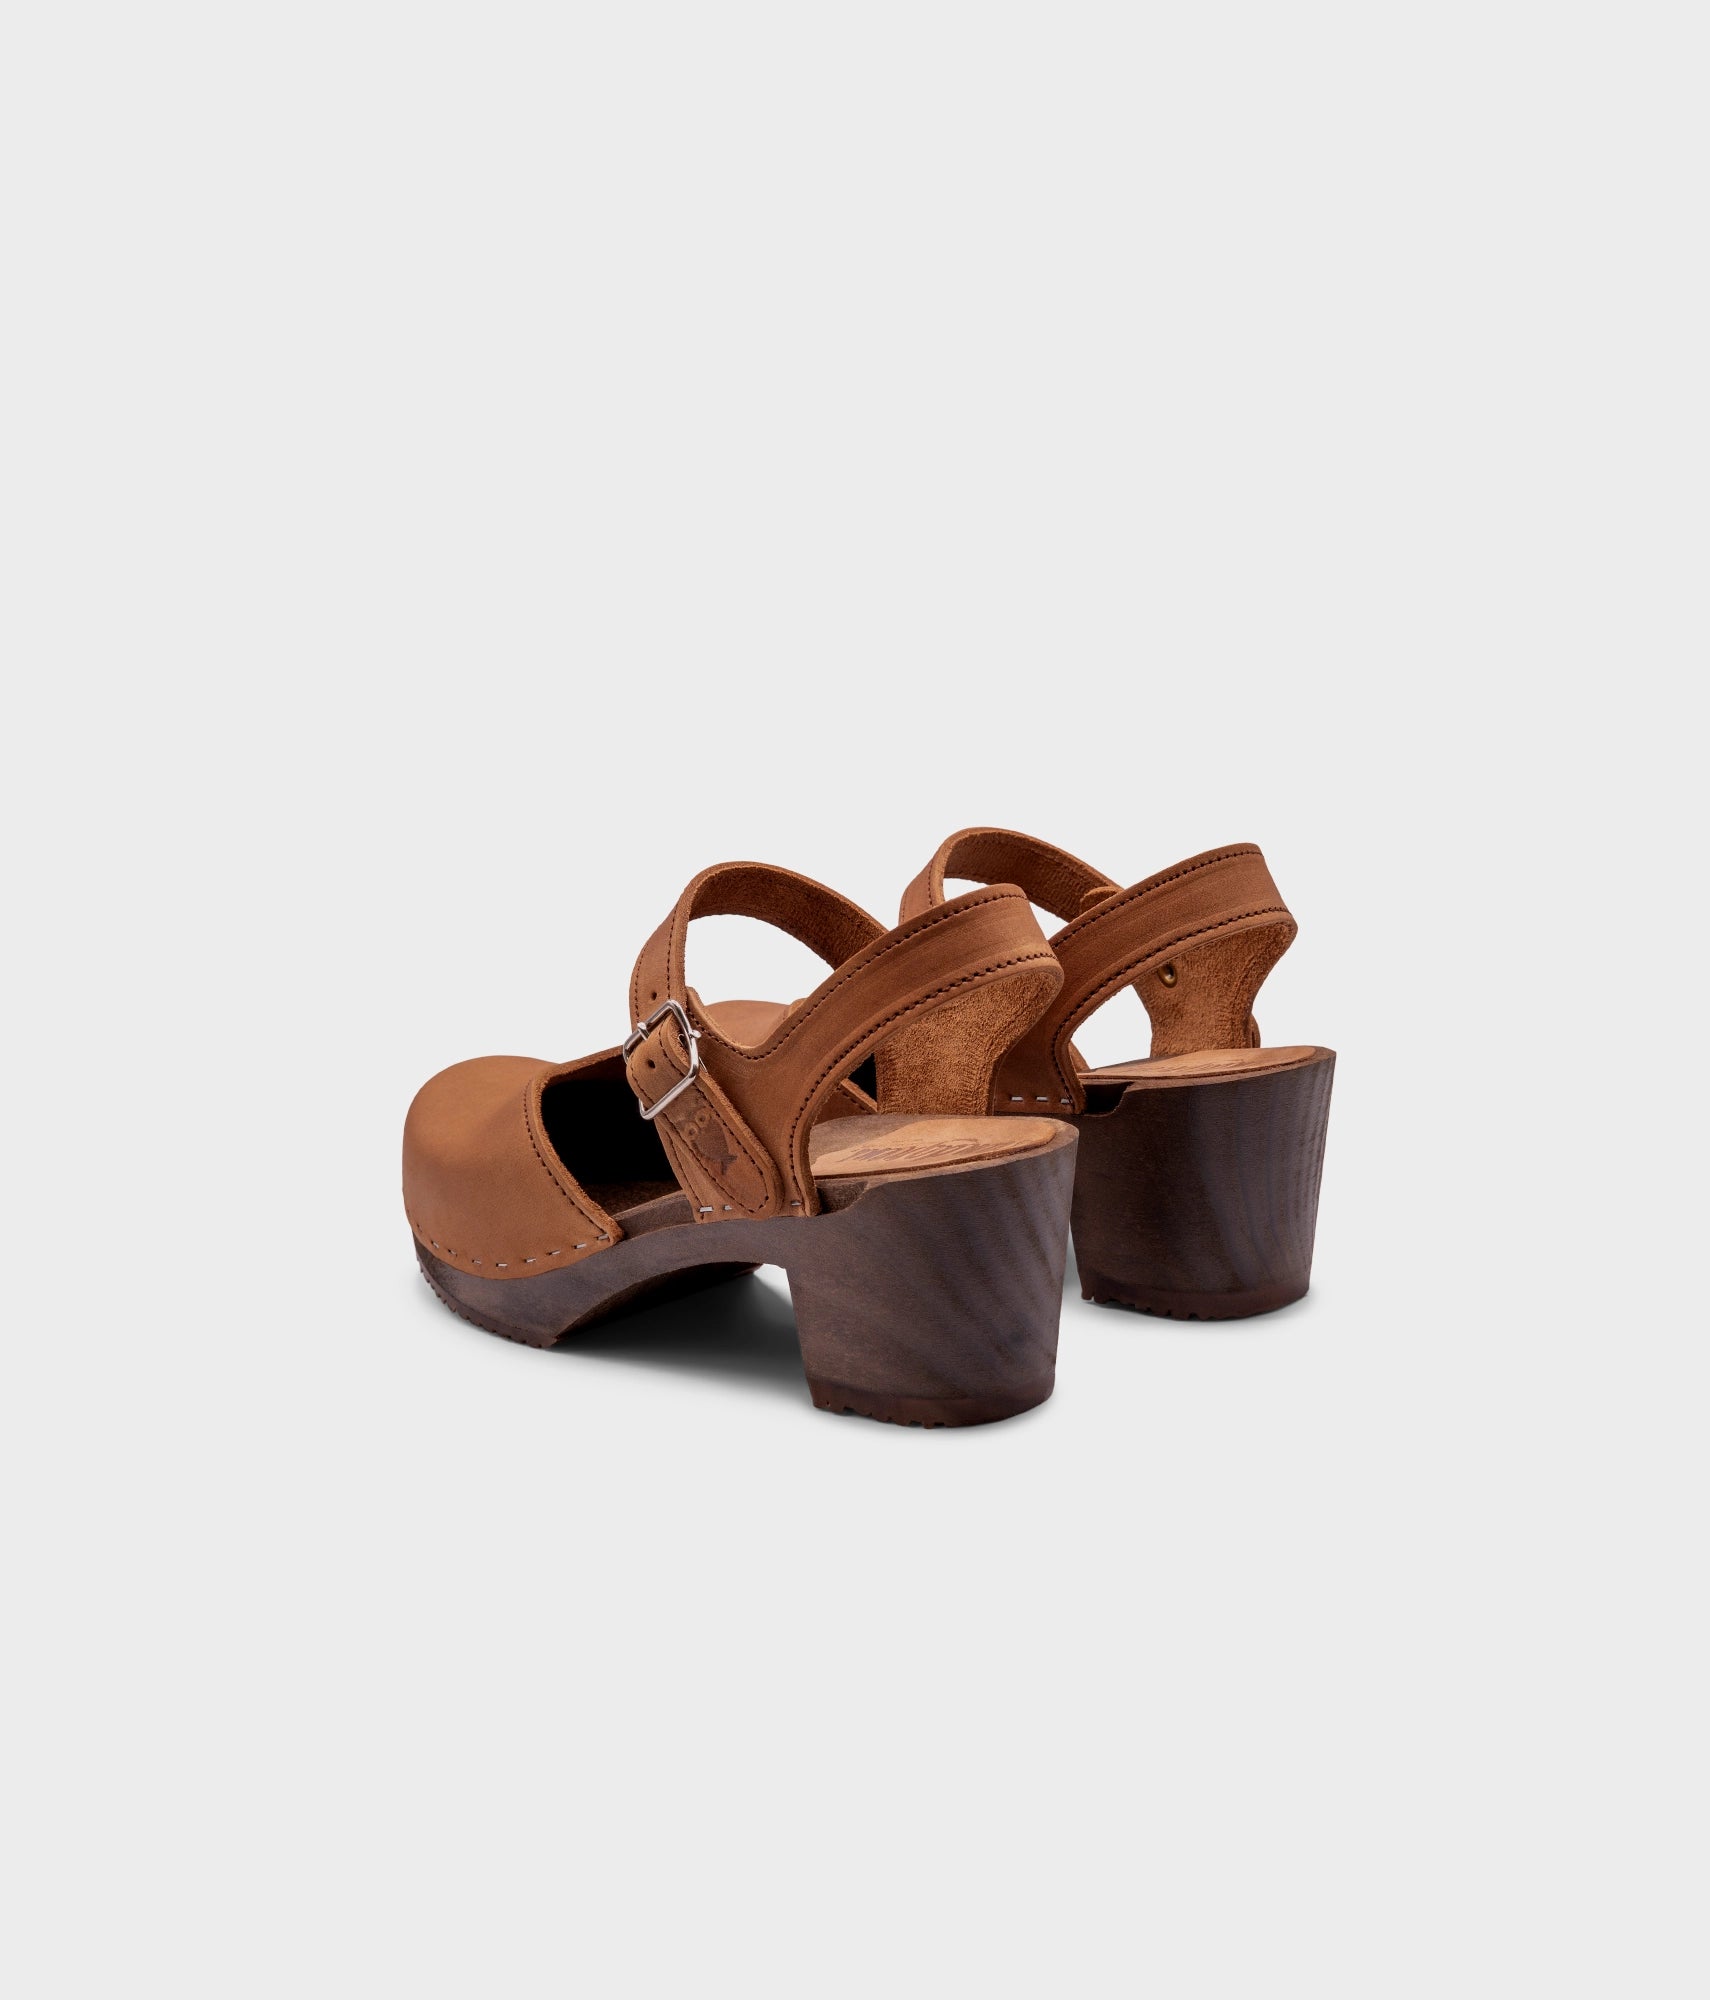 high heeled closed-toe clog sandal in light brown nubuck leather stapled on a dark wooden base